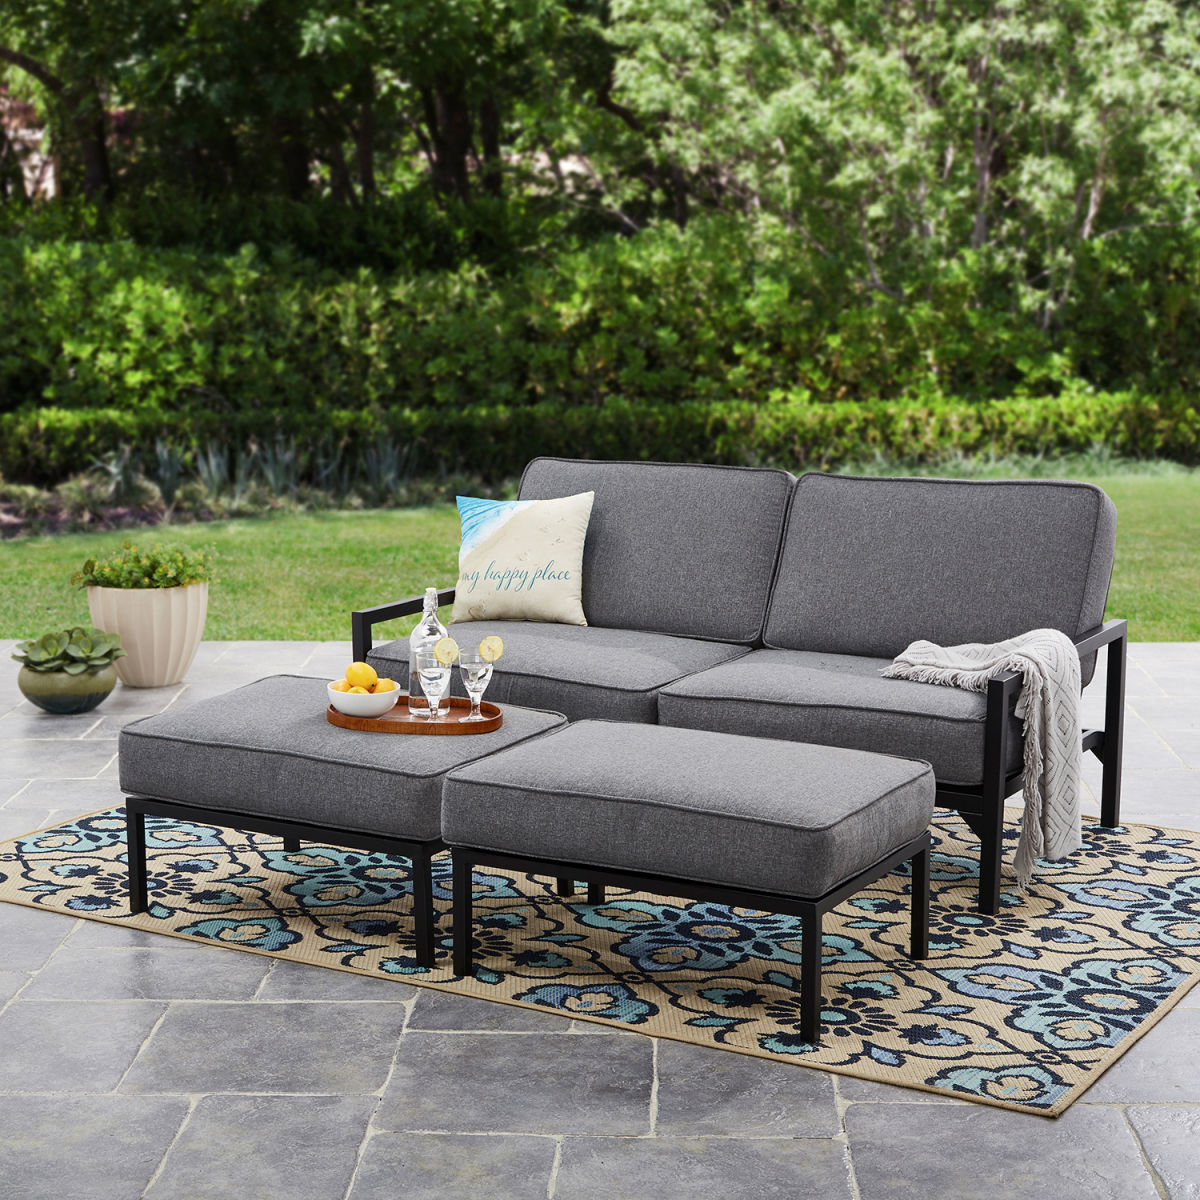 Mainstays Moss Falls 3pc Outdoor Sofa Daybed Set